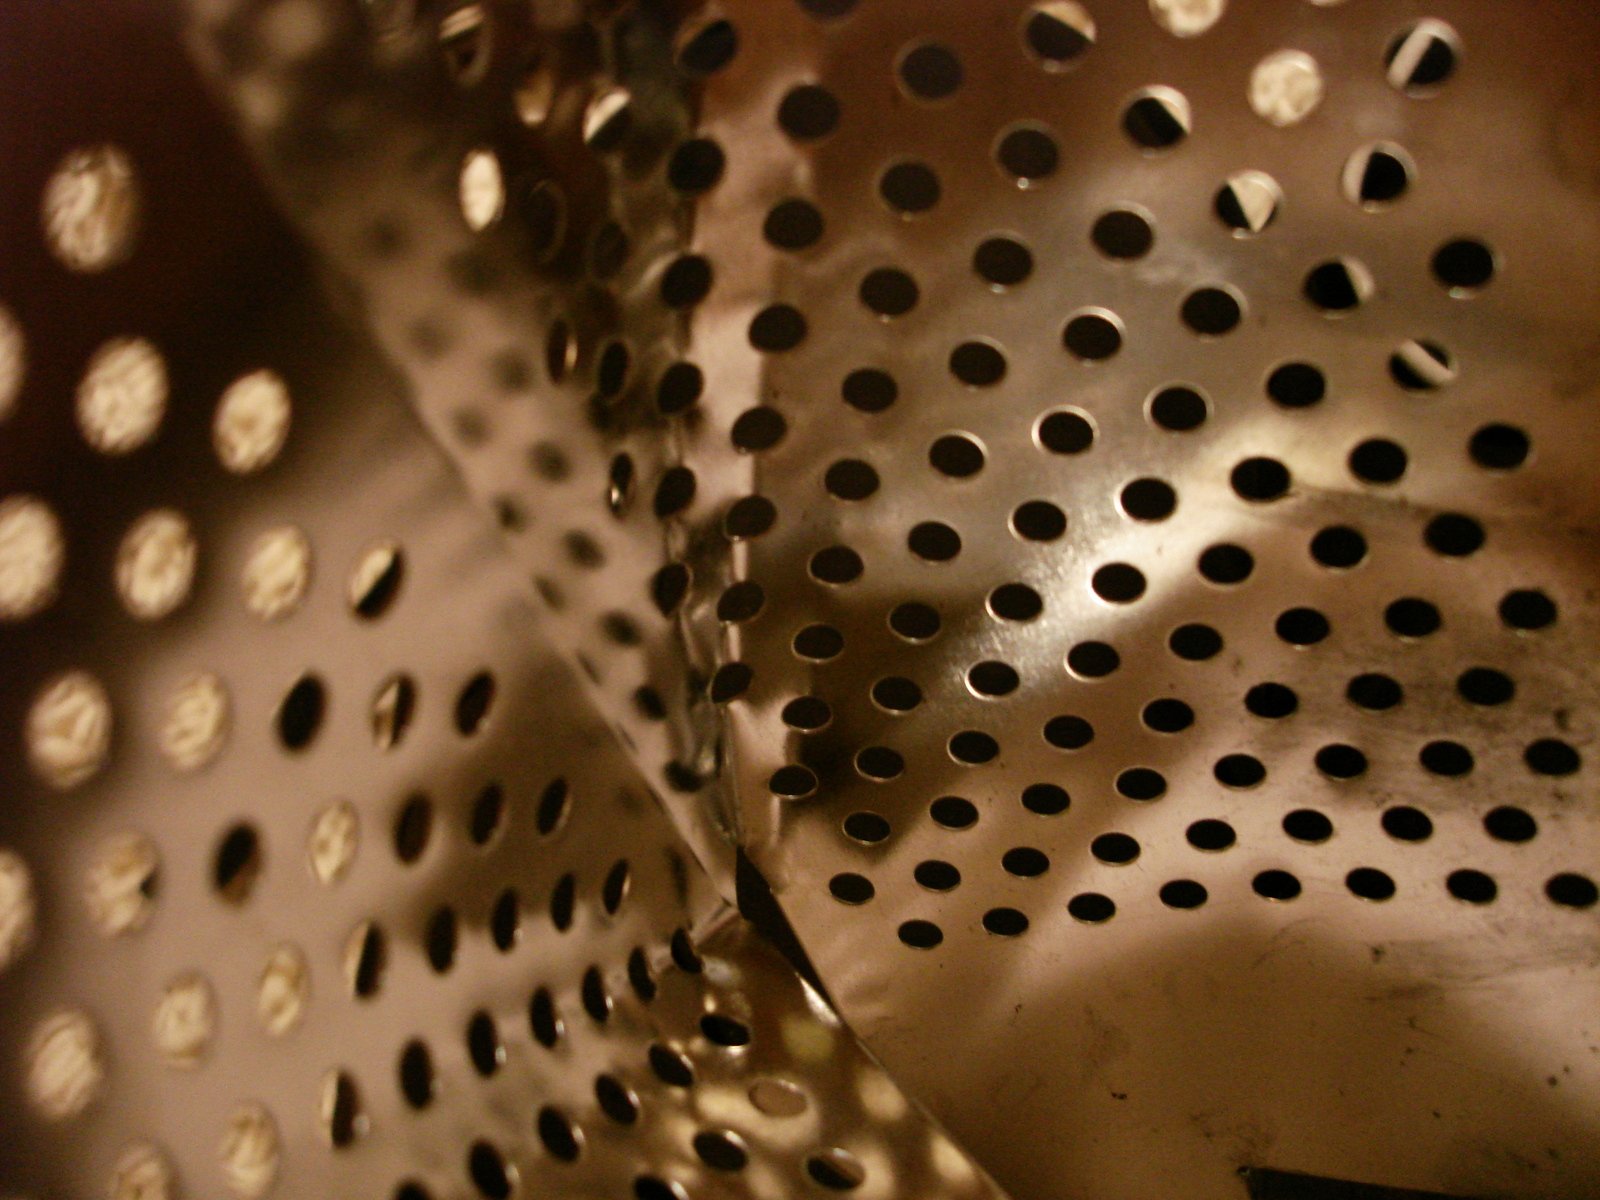 several holes on an metal surface